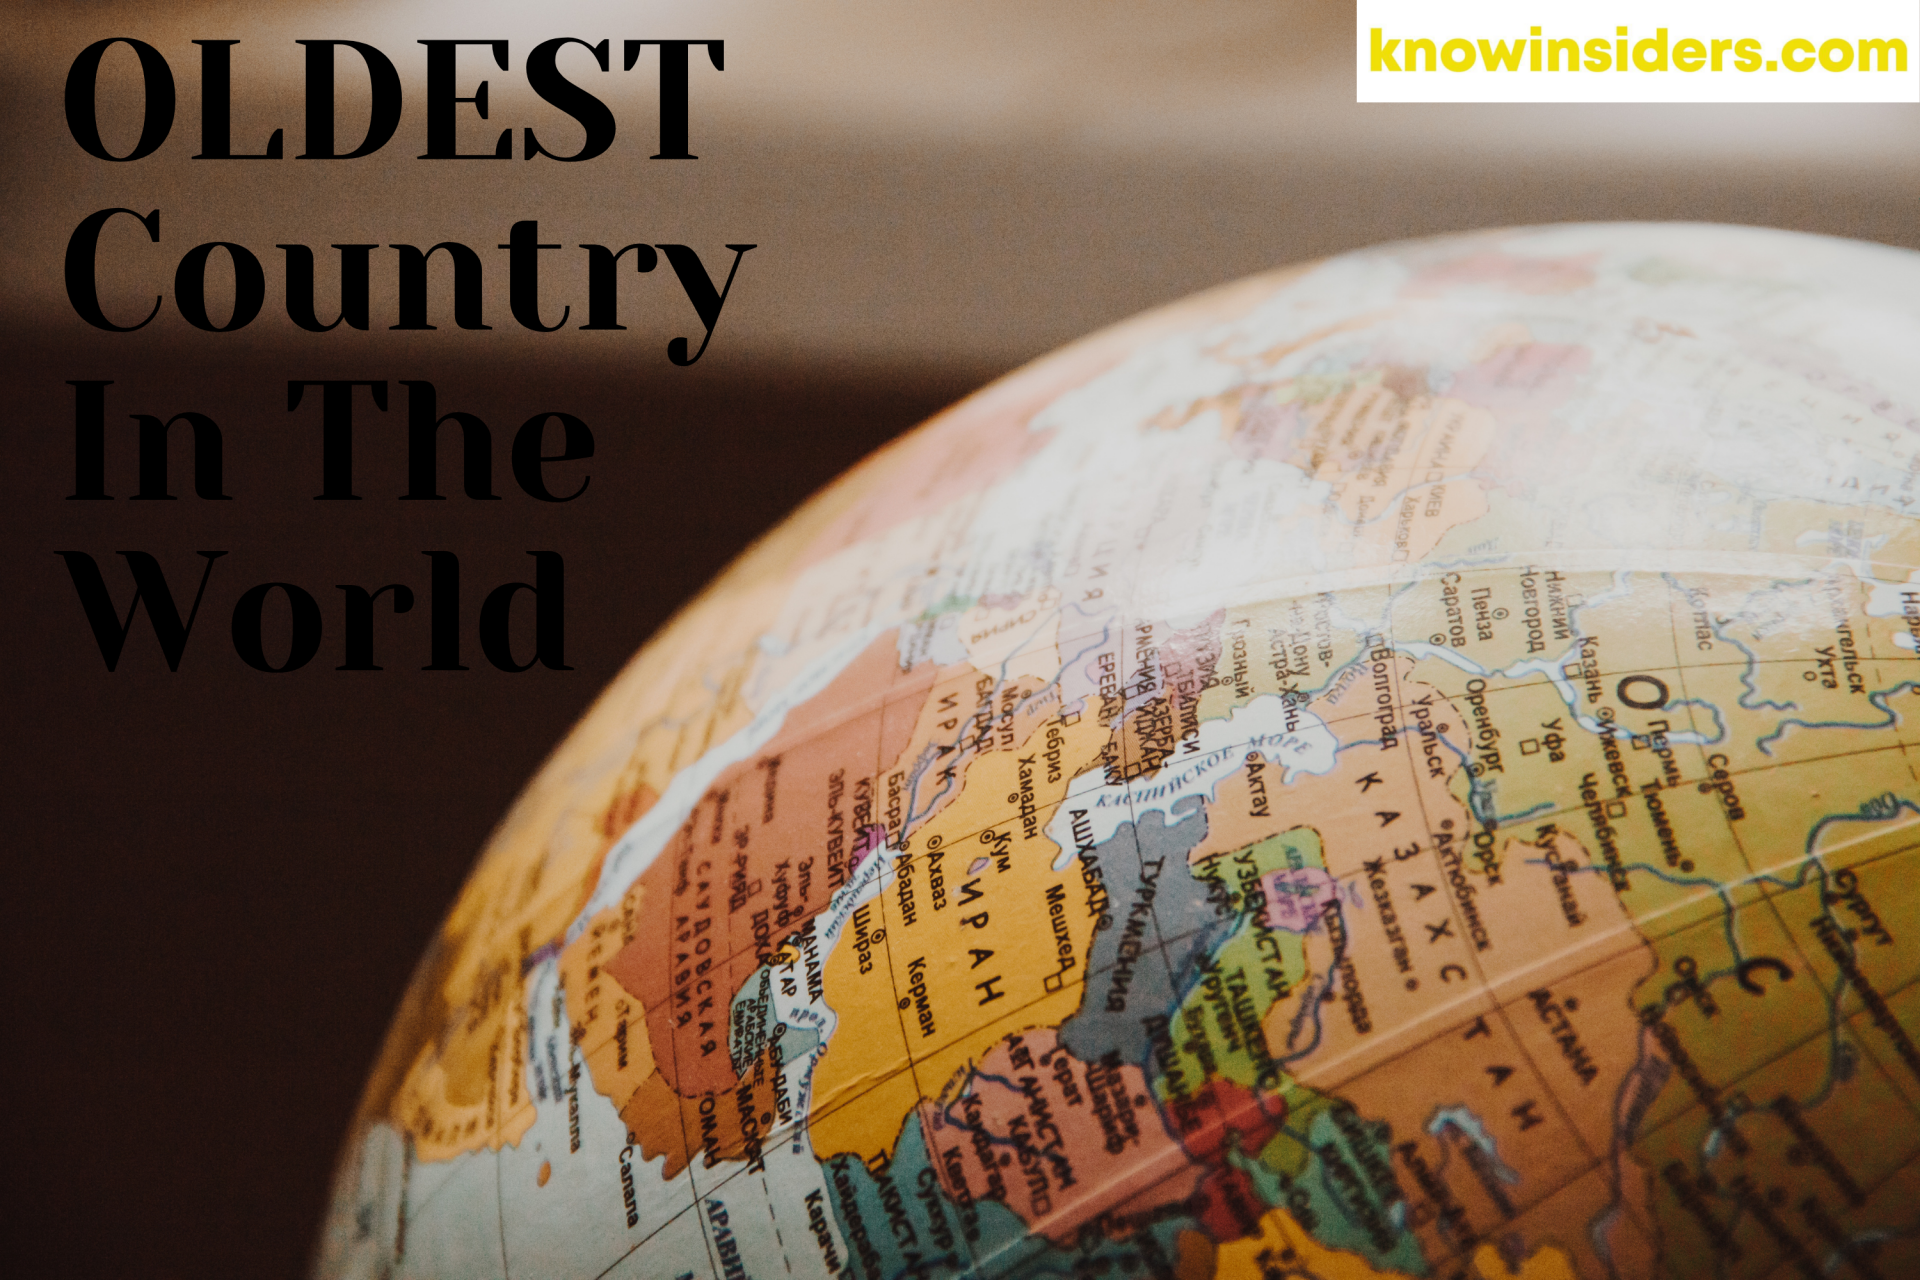 What is The Oldest Country: India, Egypt, San Marino or China?